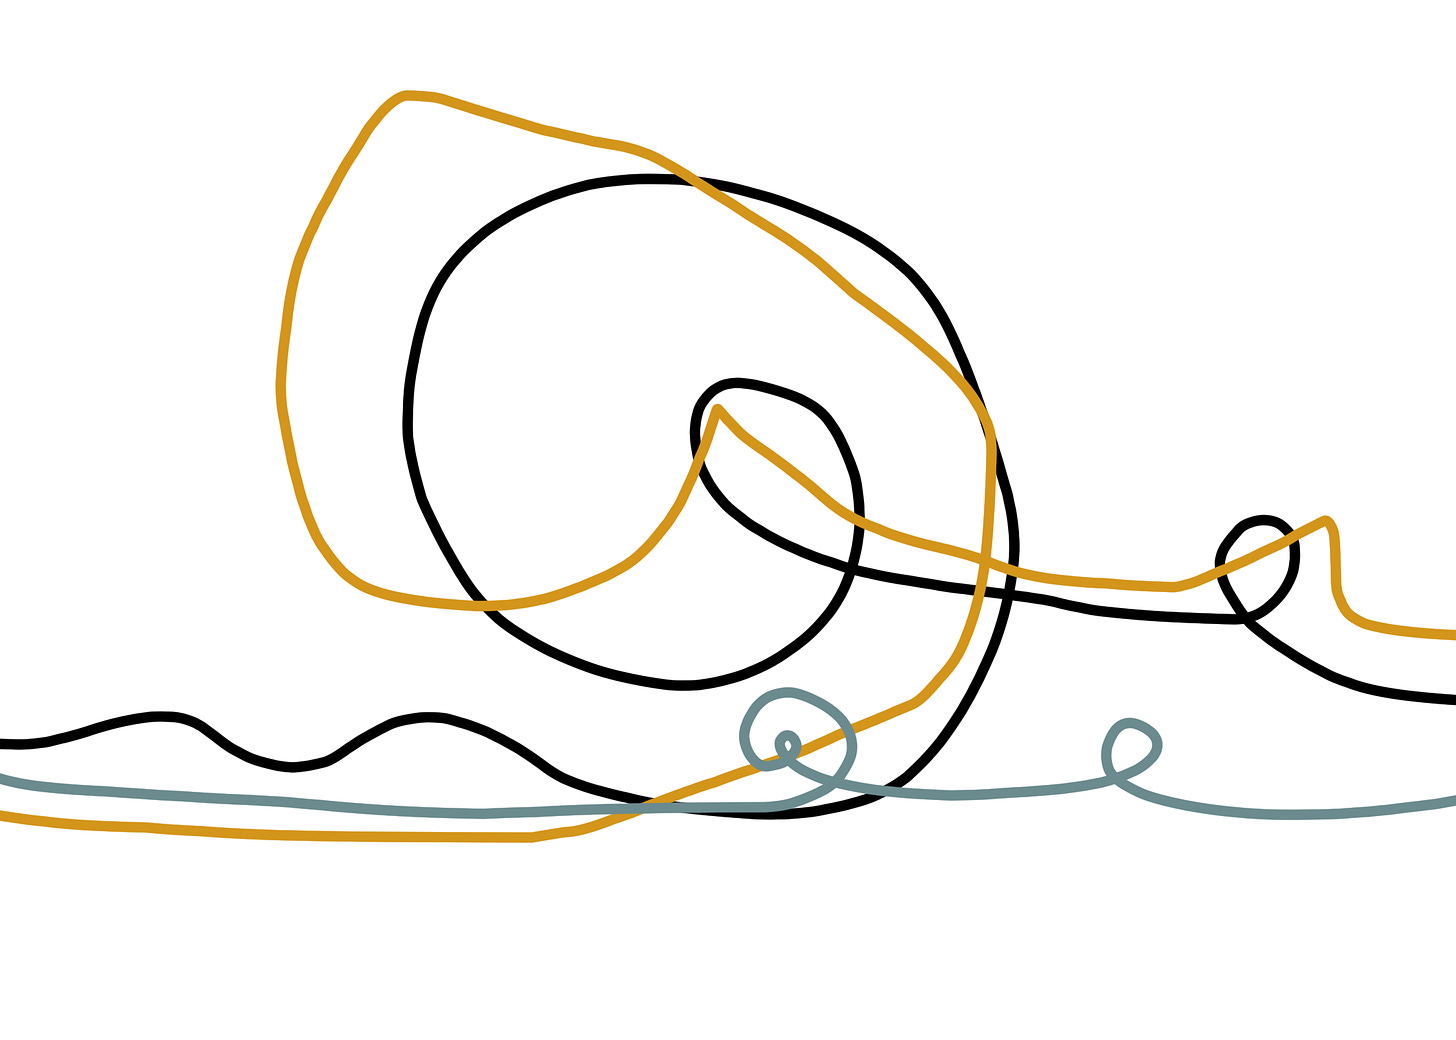 The dark swirl from the first drawing is overlayed with one yellow and one teal line. The yellow line has sharper and longer turns, the teal line mimics the shape but stays at a very low intensity in smaller swirls and loops.